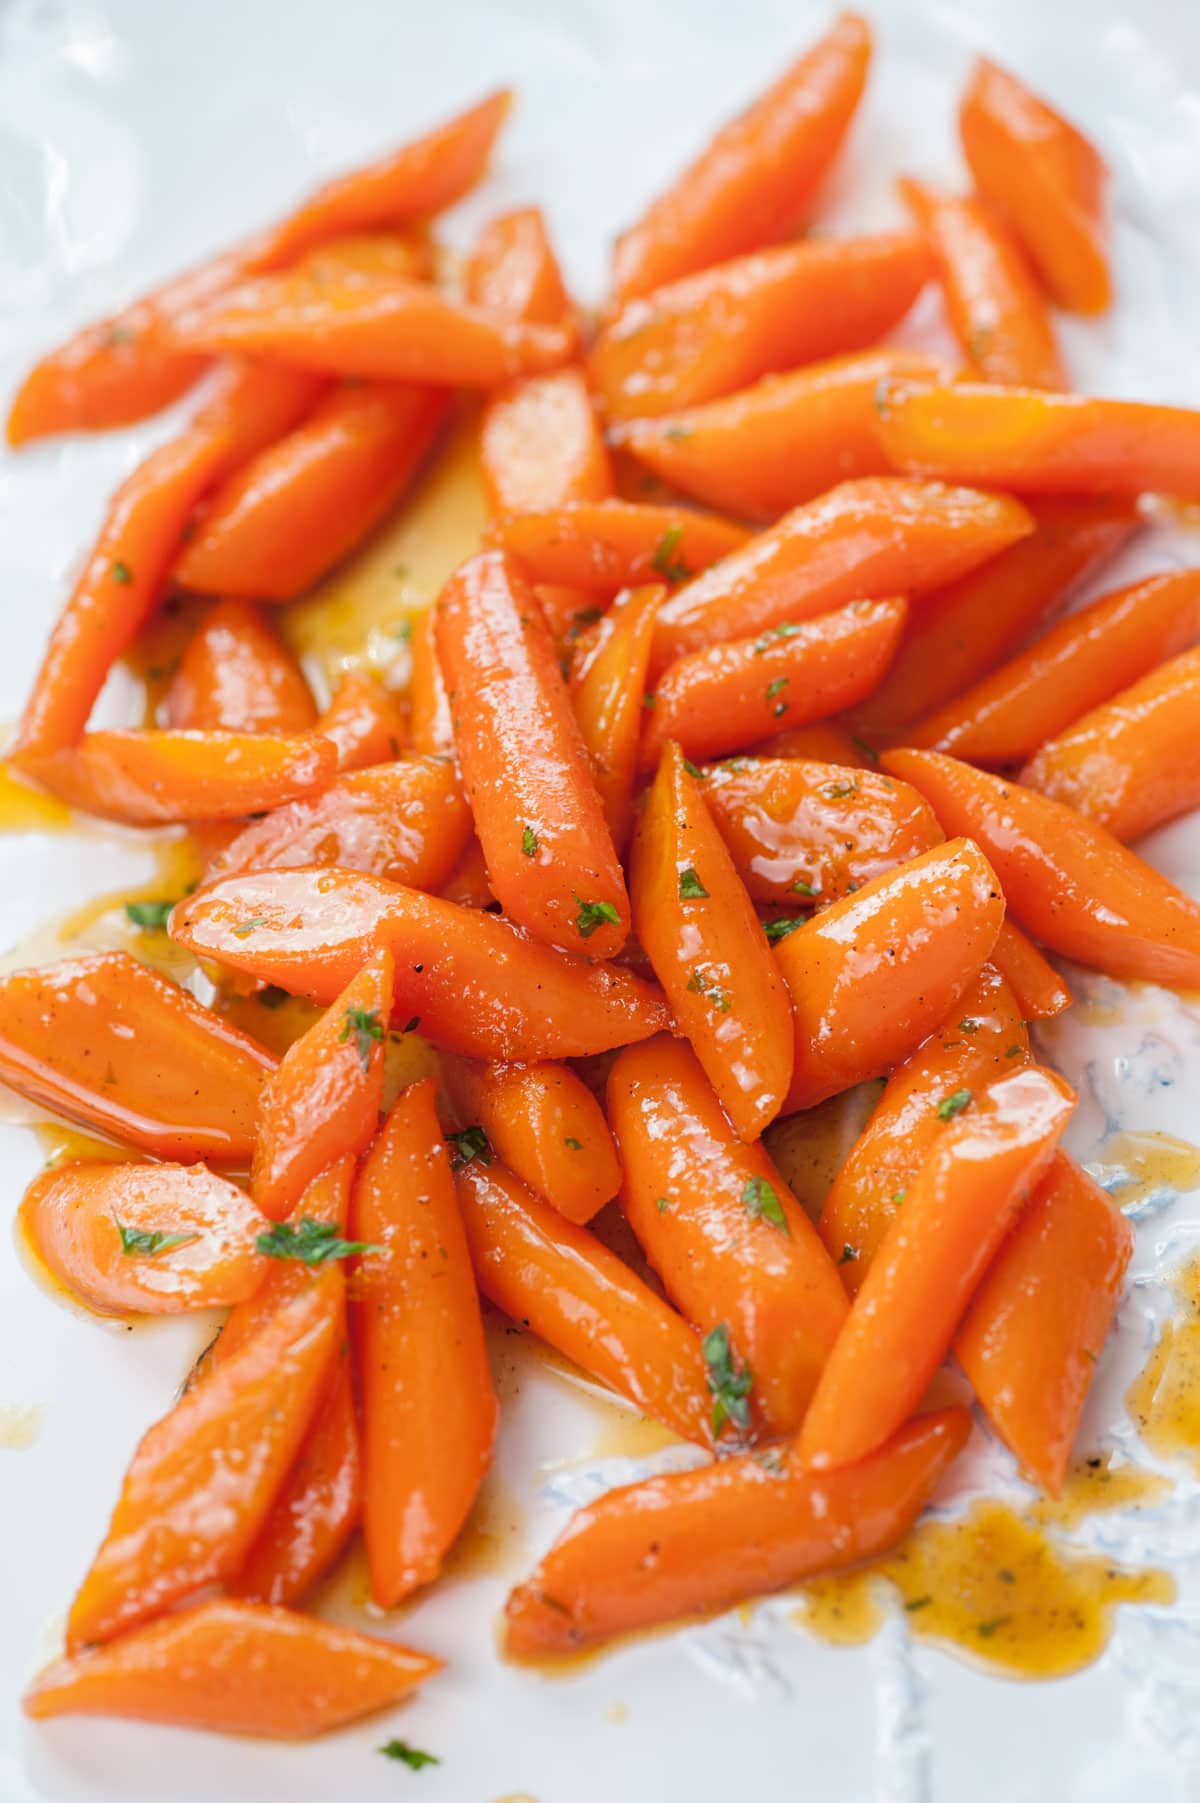 French Hand-Peeled Carrots